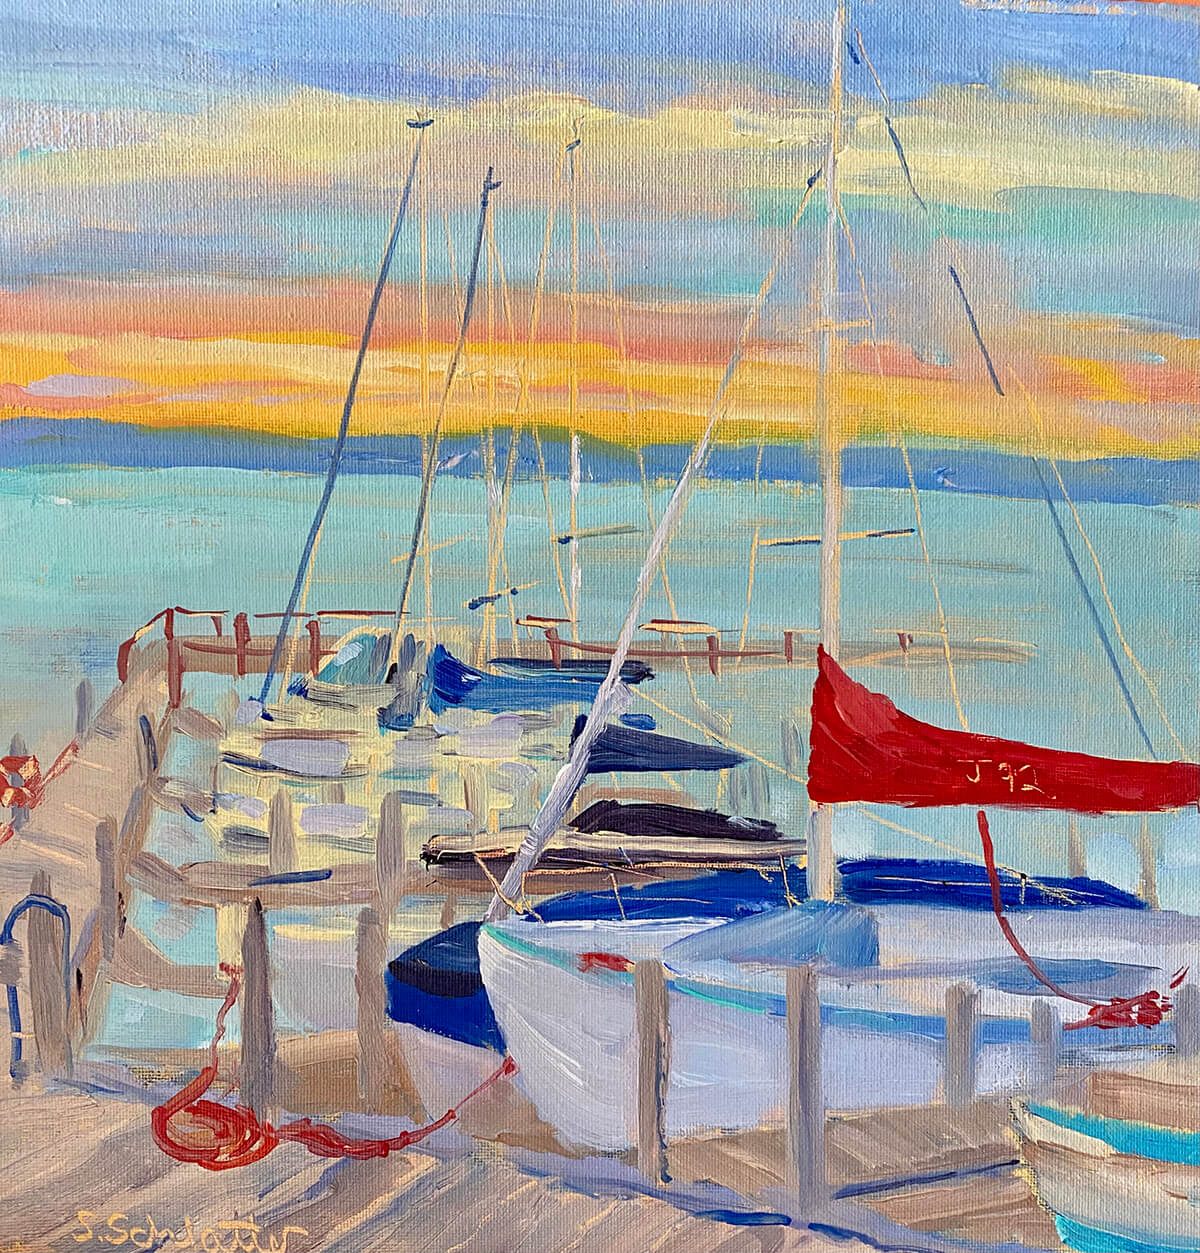 Docked painting by Stephanie Schlatter